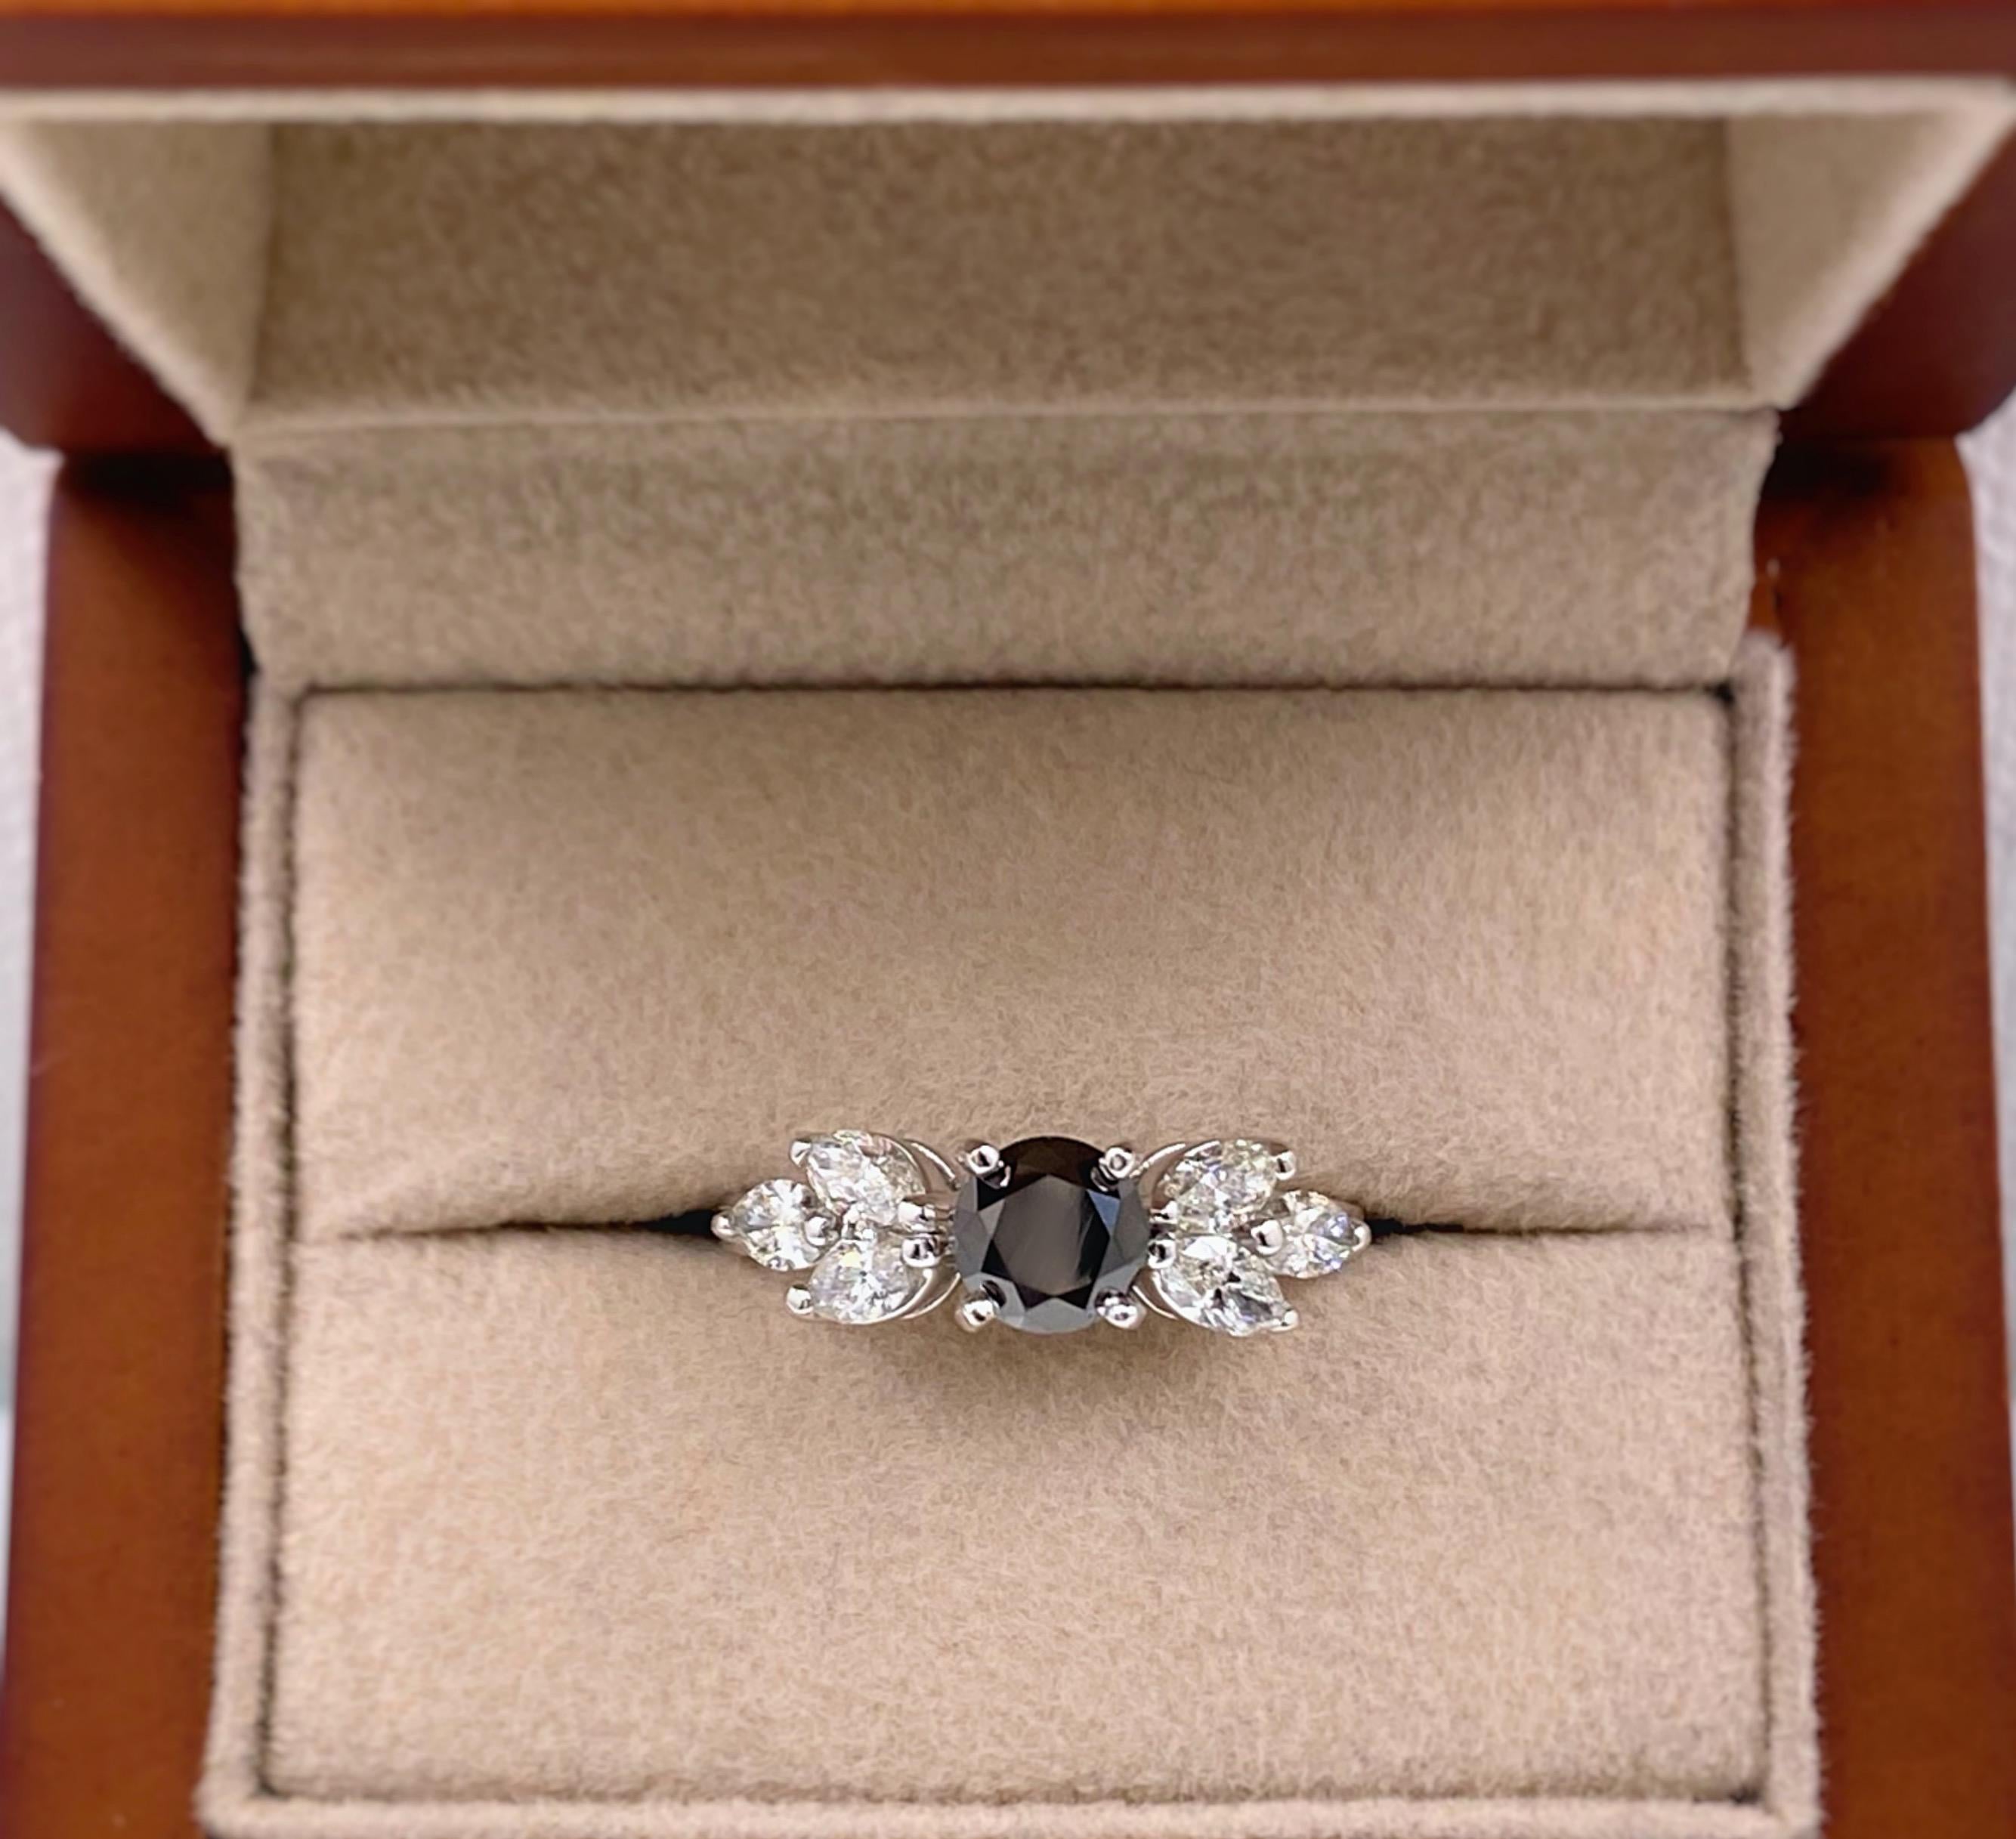 Black Round Diamond Engagement Ring
Style:  Solitaire with Accent Diamonds 
Metal:  14 kt White Gold
Size:  6 - Sizable
TCW:  1.40 tcw
Main Diamond:  Round Black Diamond 0.80 cts
Accent Diamonds:  6 Marquise Diamonds ( 3 on each side to mimic the